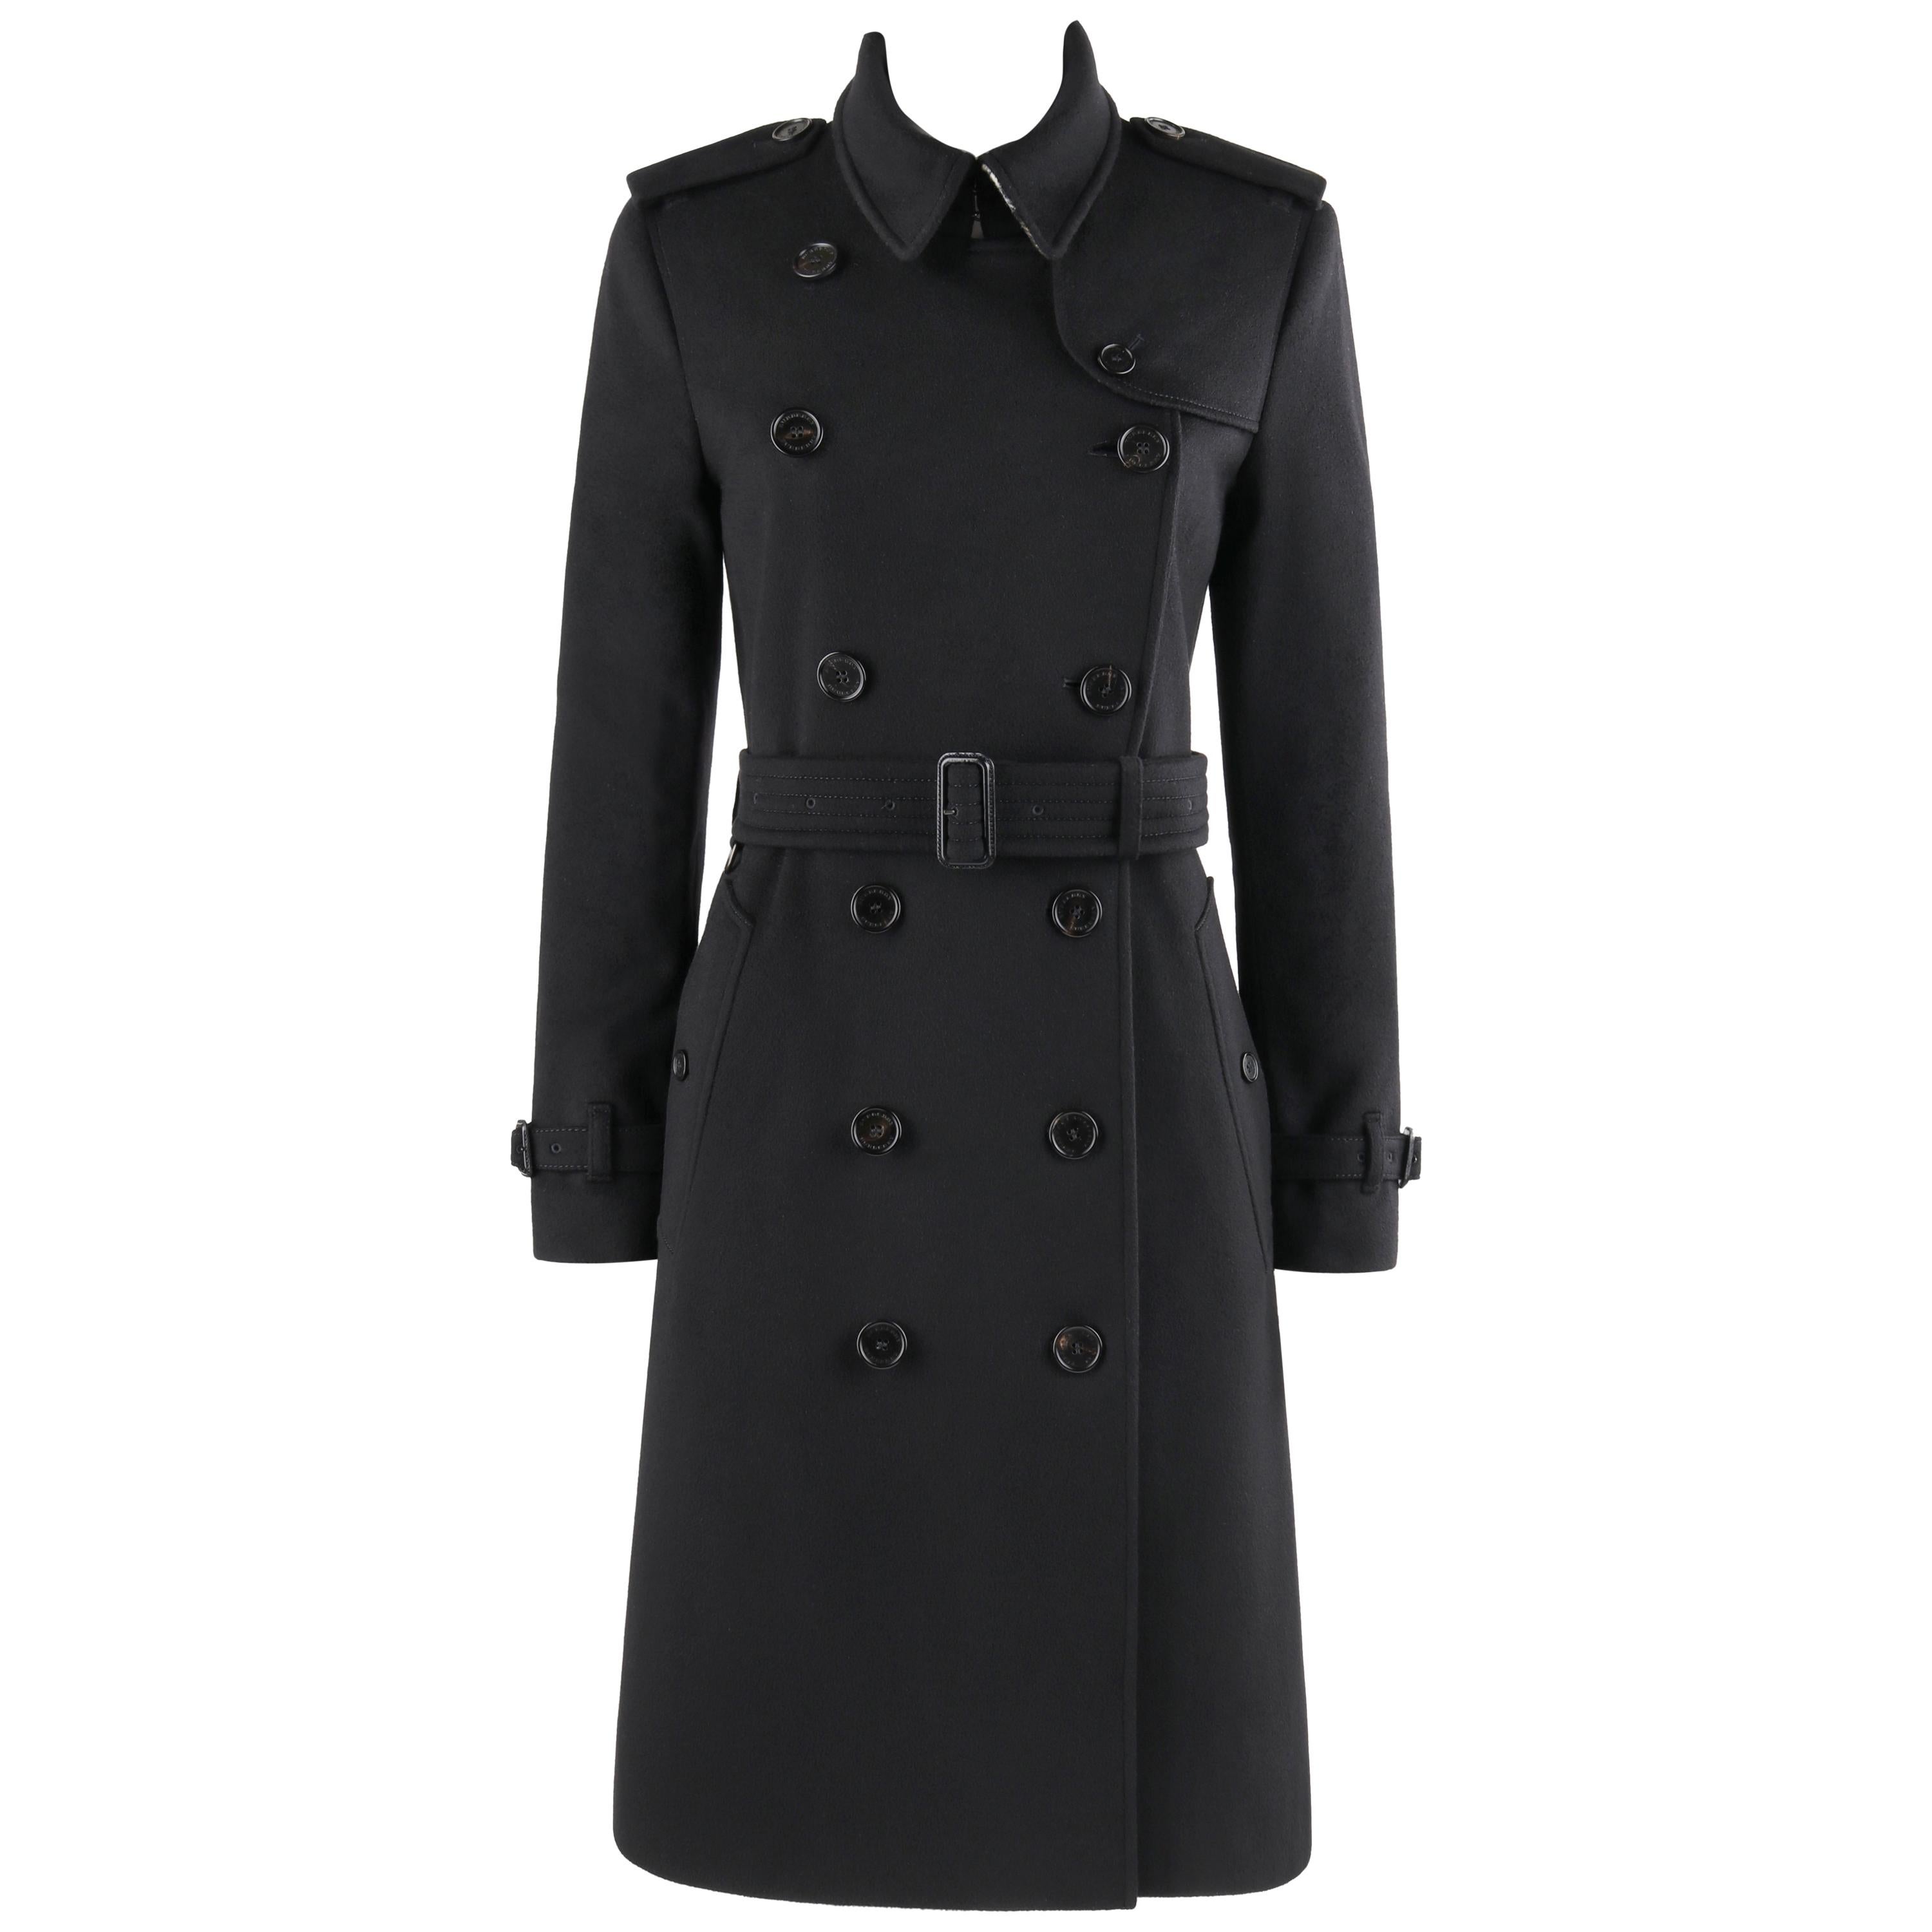 BURBERRY A/W 2019 “Kensington” Black Cashmere Double Breasted Belted Trench Coat